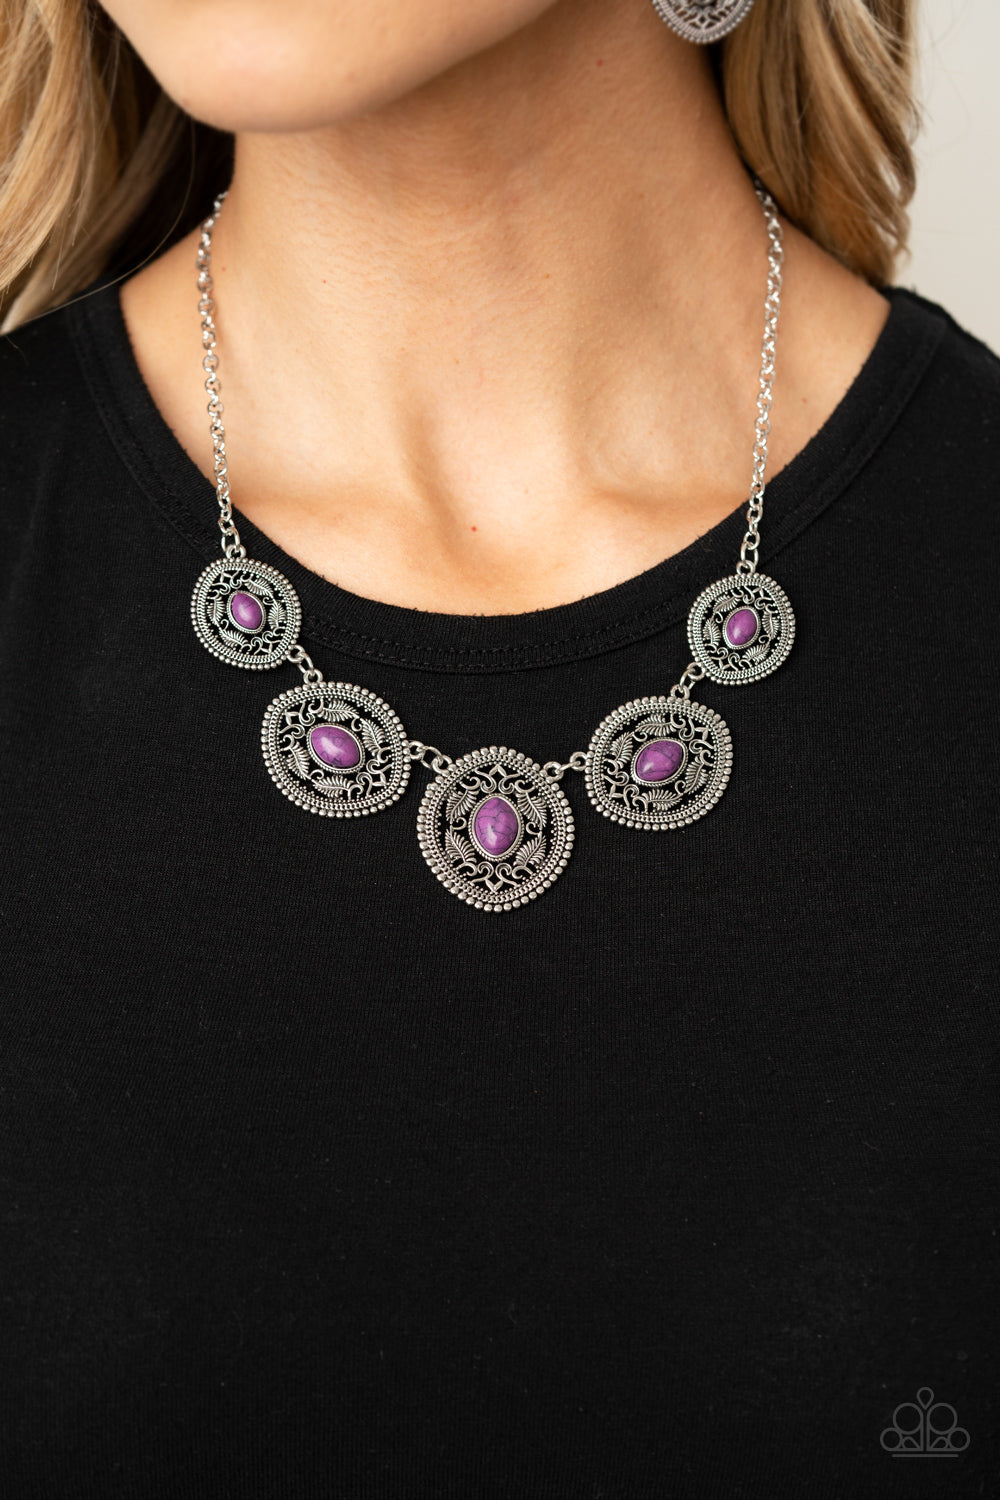 Alter ECO - Purple and Silver Necklace - Paparazzi Accessories - Dainty purple stones dot the centers of leafy silver filigree filled frames that delicately connect below the collar, creating a colorfully earthy look. Features an adjustable clasp closure.